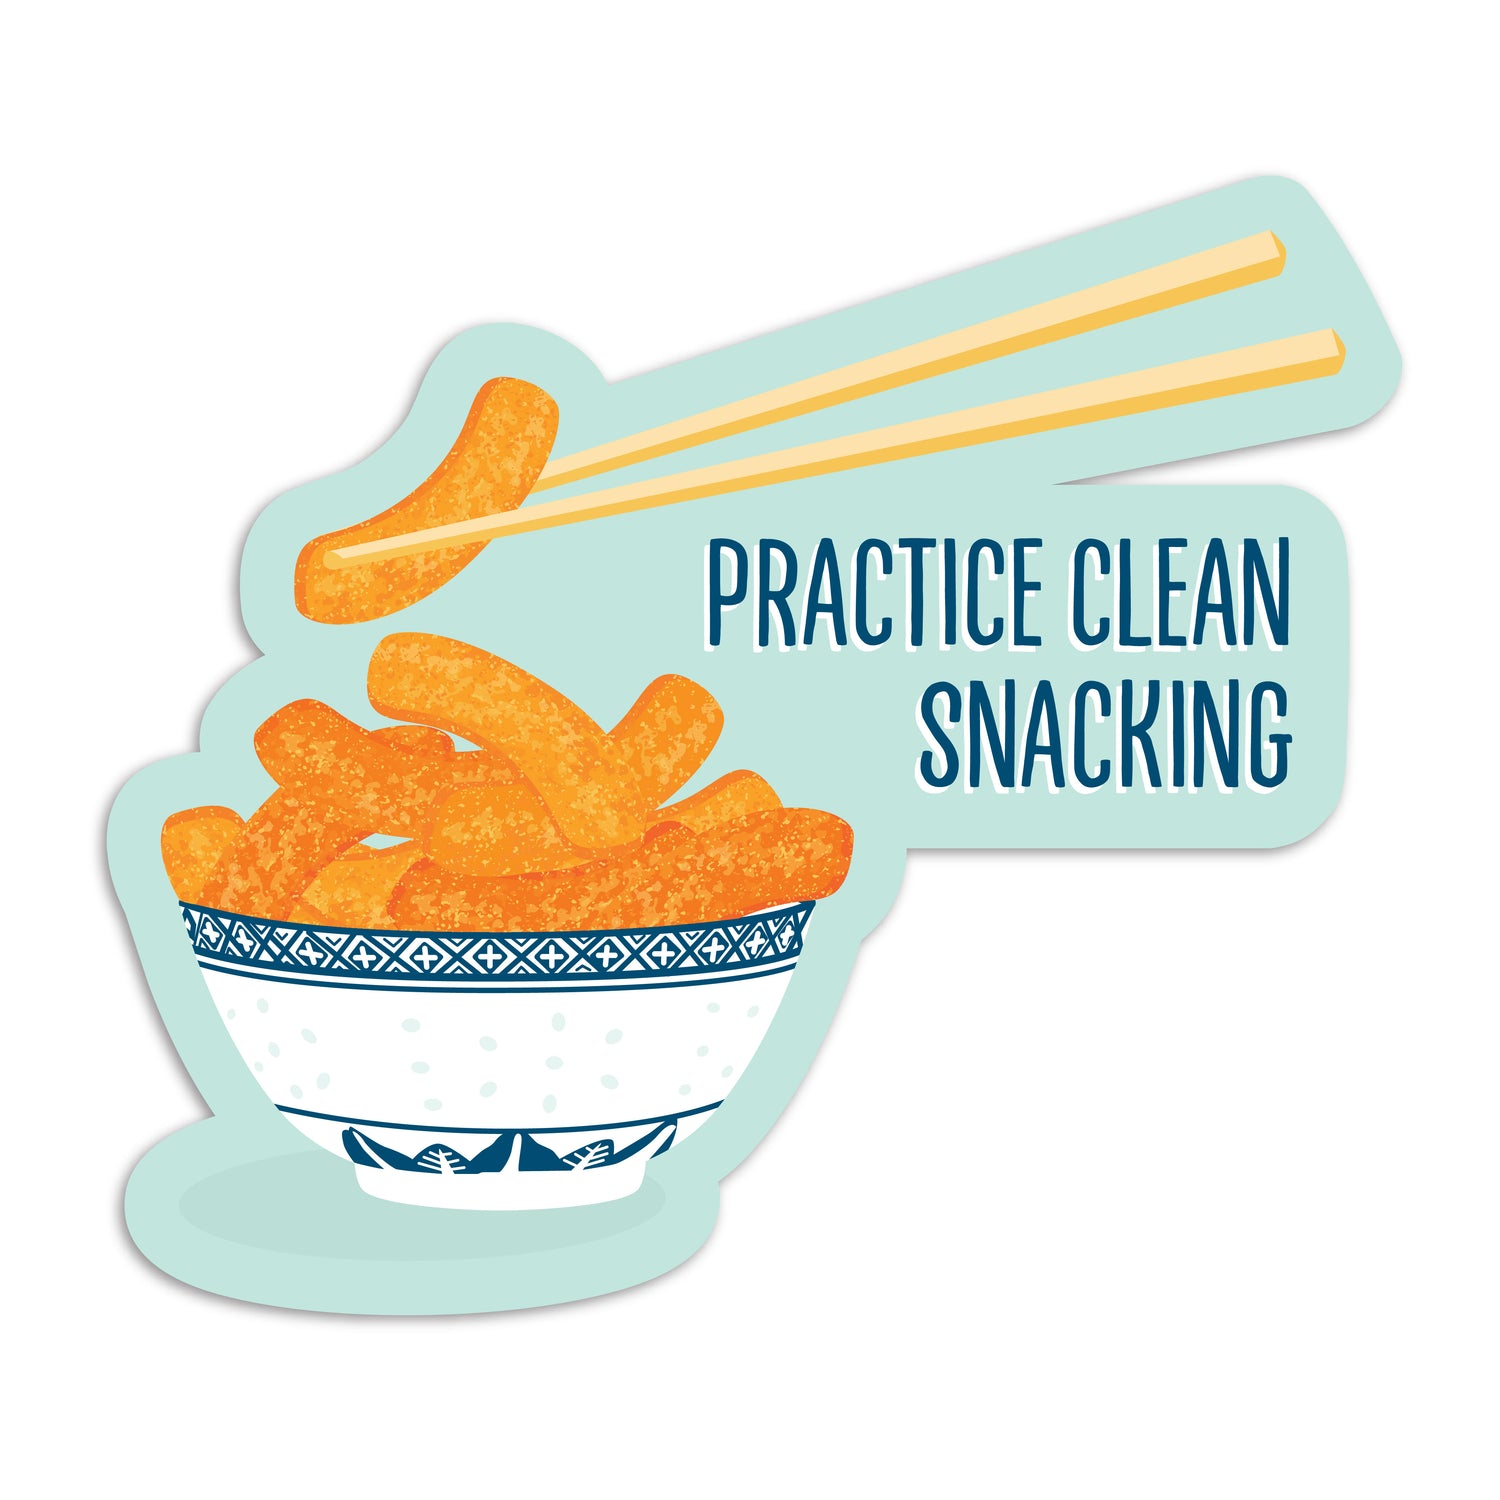 Practice clean snacking cheetos and chopsticks vinyl sticker by I&